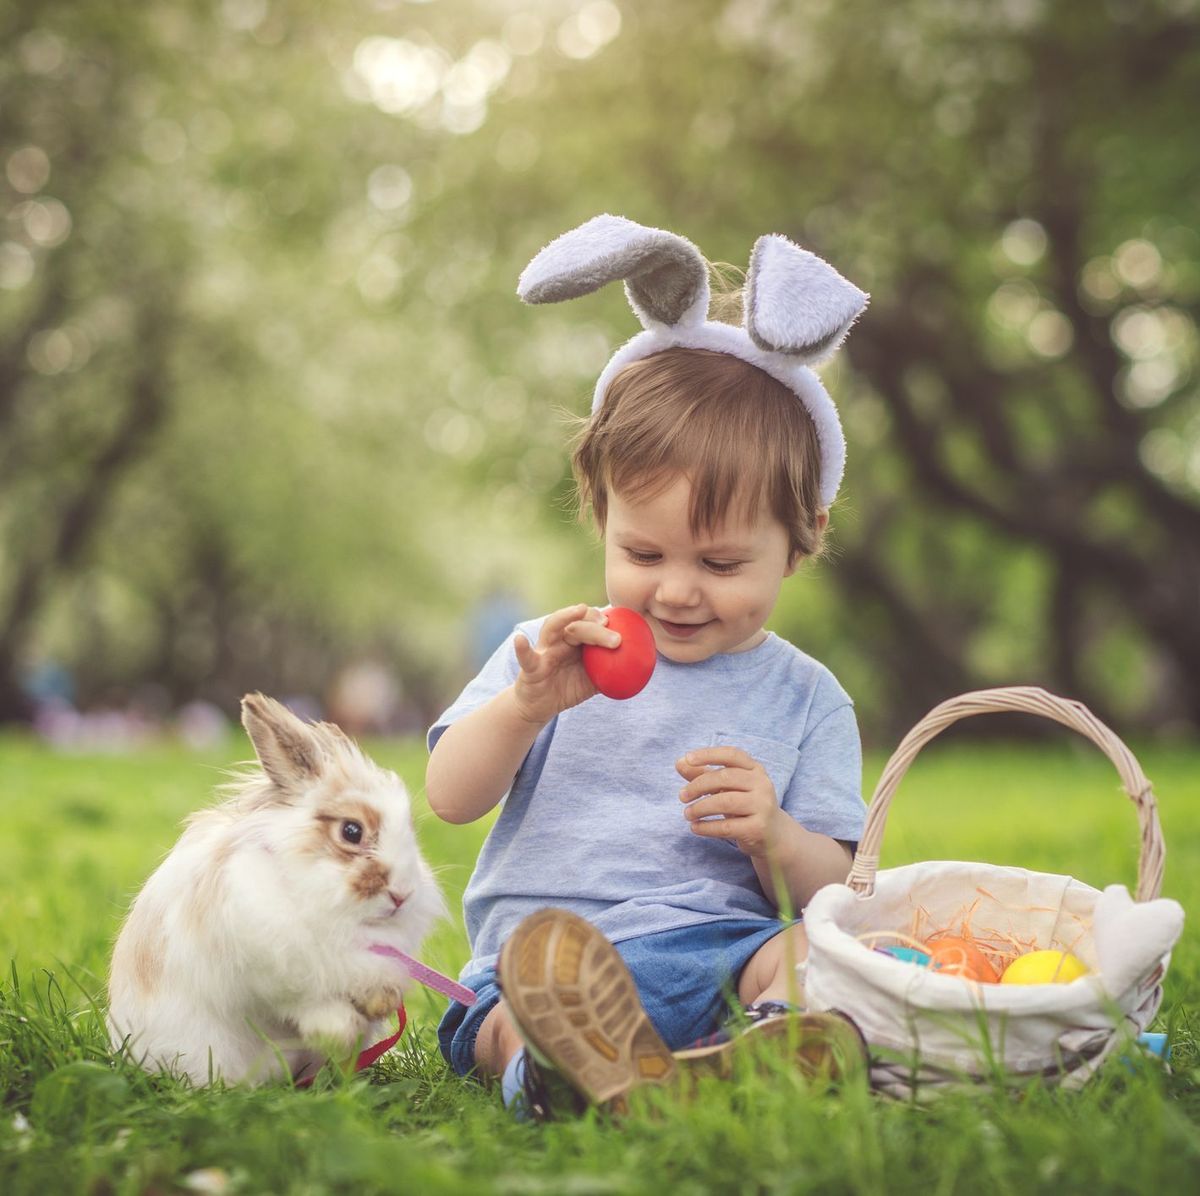 150 Best Easter Instagram Captions - Cute Easter Captions